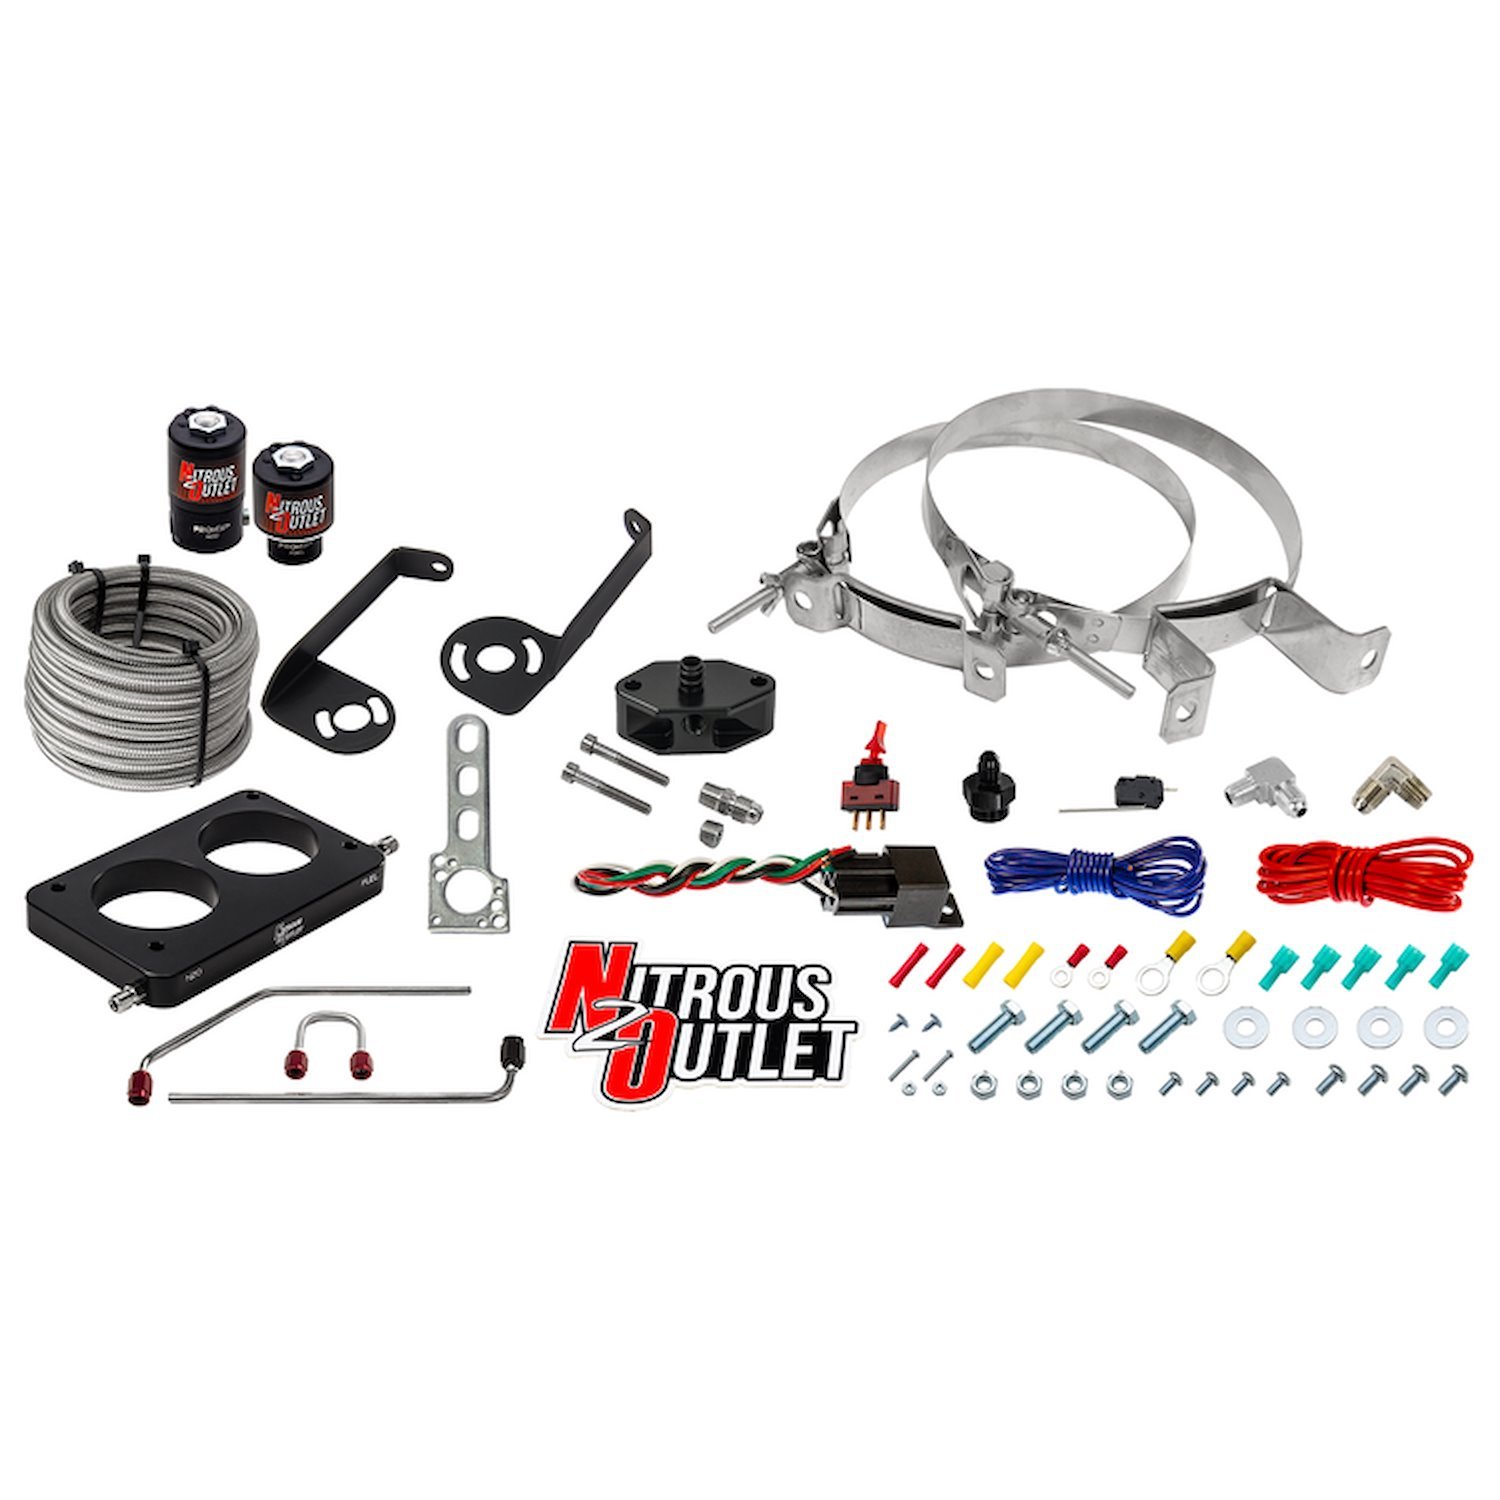 00-10143-00 Ford 2005-2010 4.6L 3V Mustang Hard-Line Plate System, Gas/E85, 5-55psi, 50-200HP, No Bottle